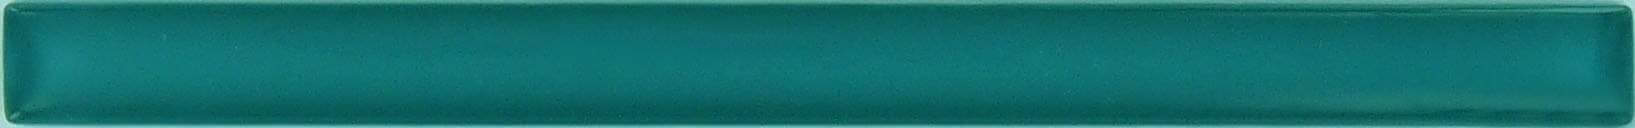 Teal Green 5/8" x 8" Glossy Glass Liner Millenium Products